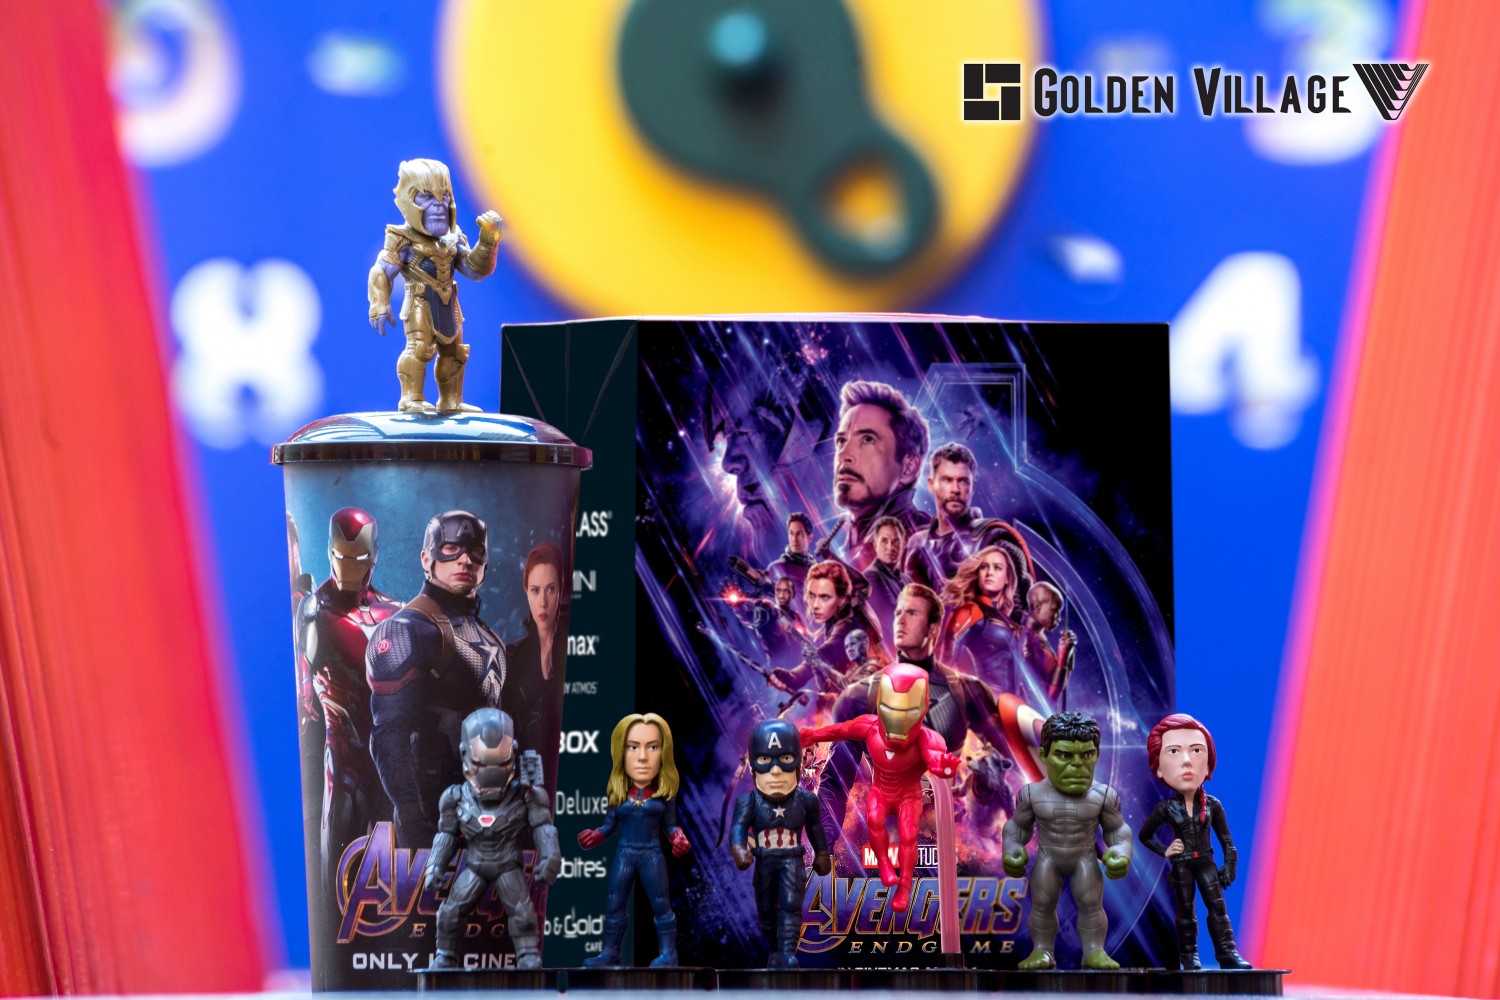 All The Avengers: Endgame Singapore Cinema Goodies In One 